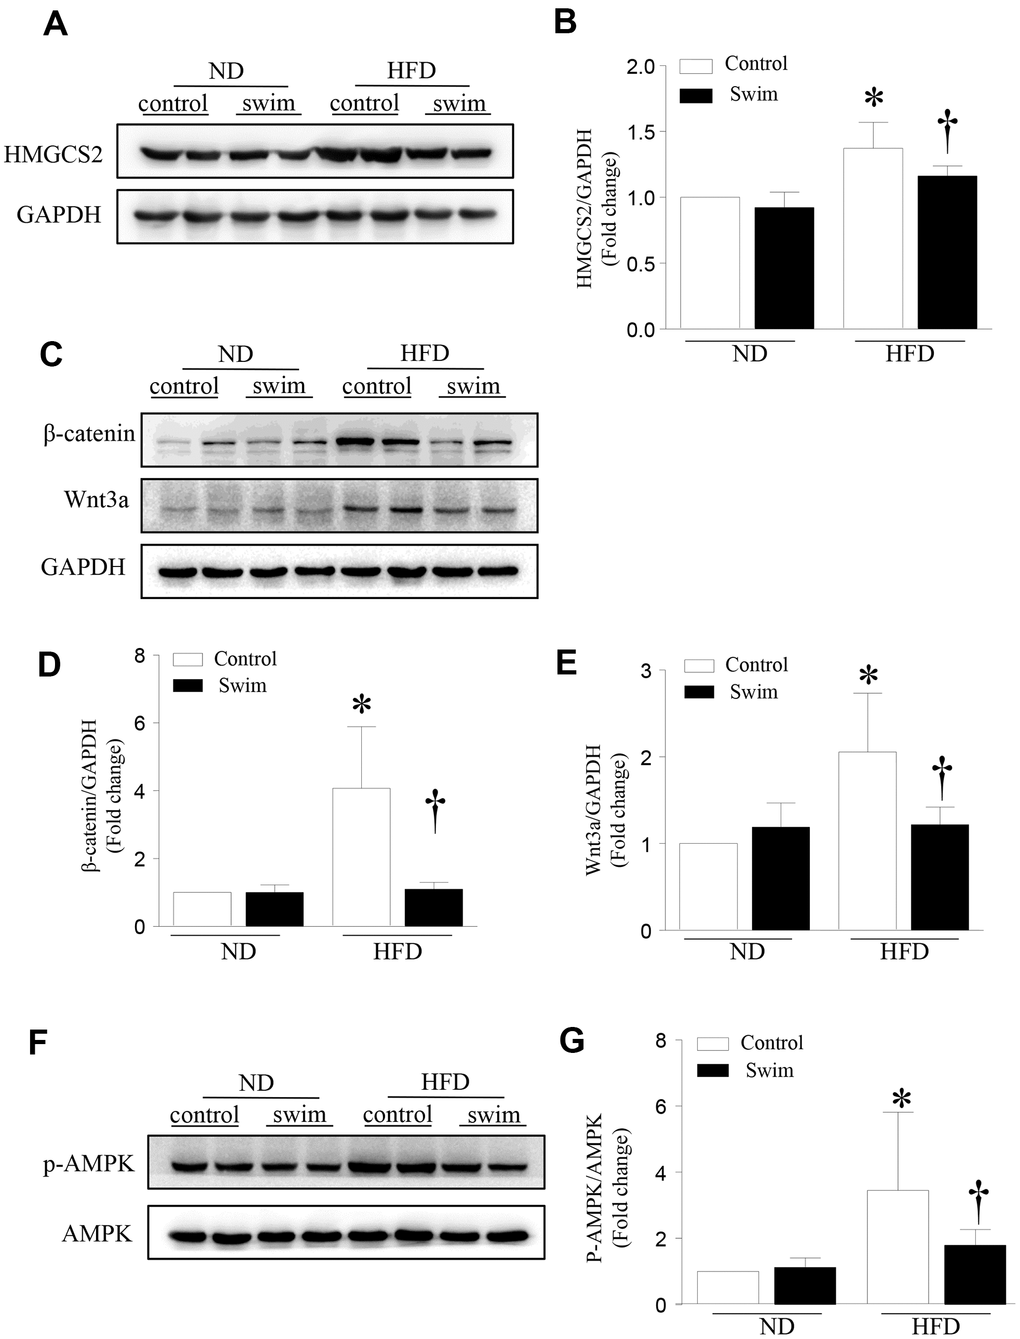 Exercise-dependent reduction of HFD-induced expression of HMGCS2 and Wnt3a/β-catenin in hepatic tissue. (A) Representative western blot for HMGCS2 in mouse liver. (B) Quantification of HMGCS2 protein levels relative to GAPDH. (C) Representative western blot for Wnt3a/β-catenin in mouse liver. (D, E) Quantification of Wnt3a and β-catenin protein levels relative to GAPDH. (F) Representative western blot for p-AMPK in mouse liver. (G) Quantification of p-AMPK protein levels relative to AMPK. Data are presented as mean ± SD, n = 6. * P 